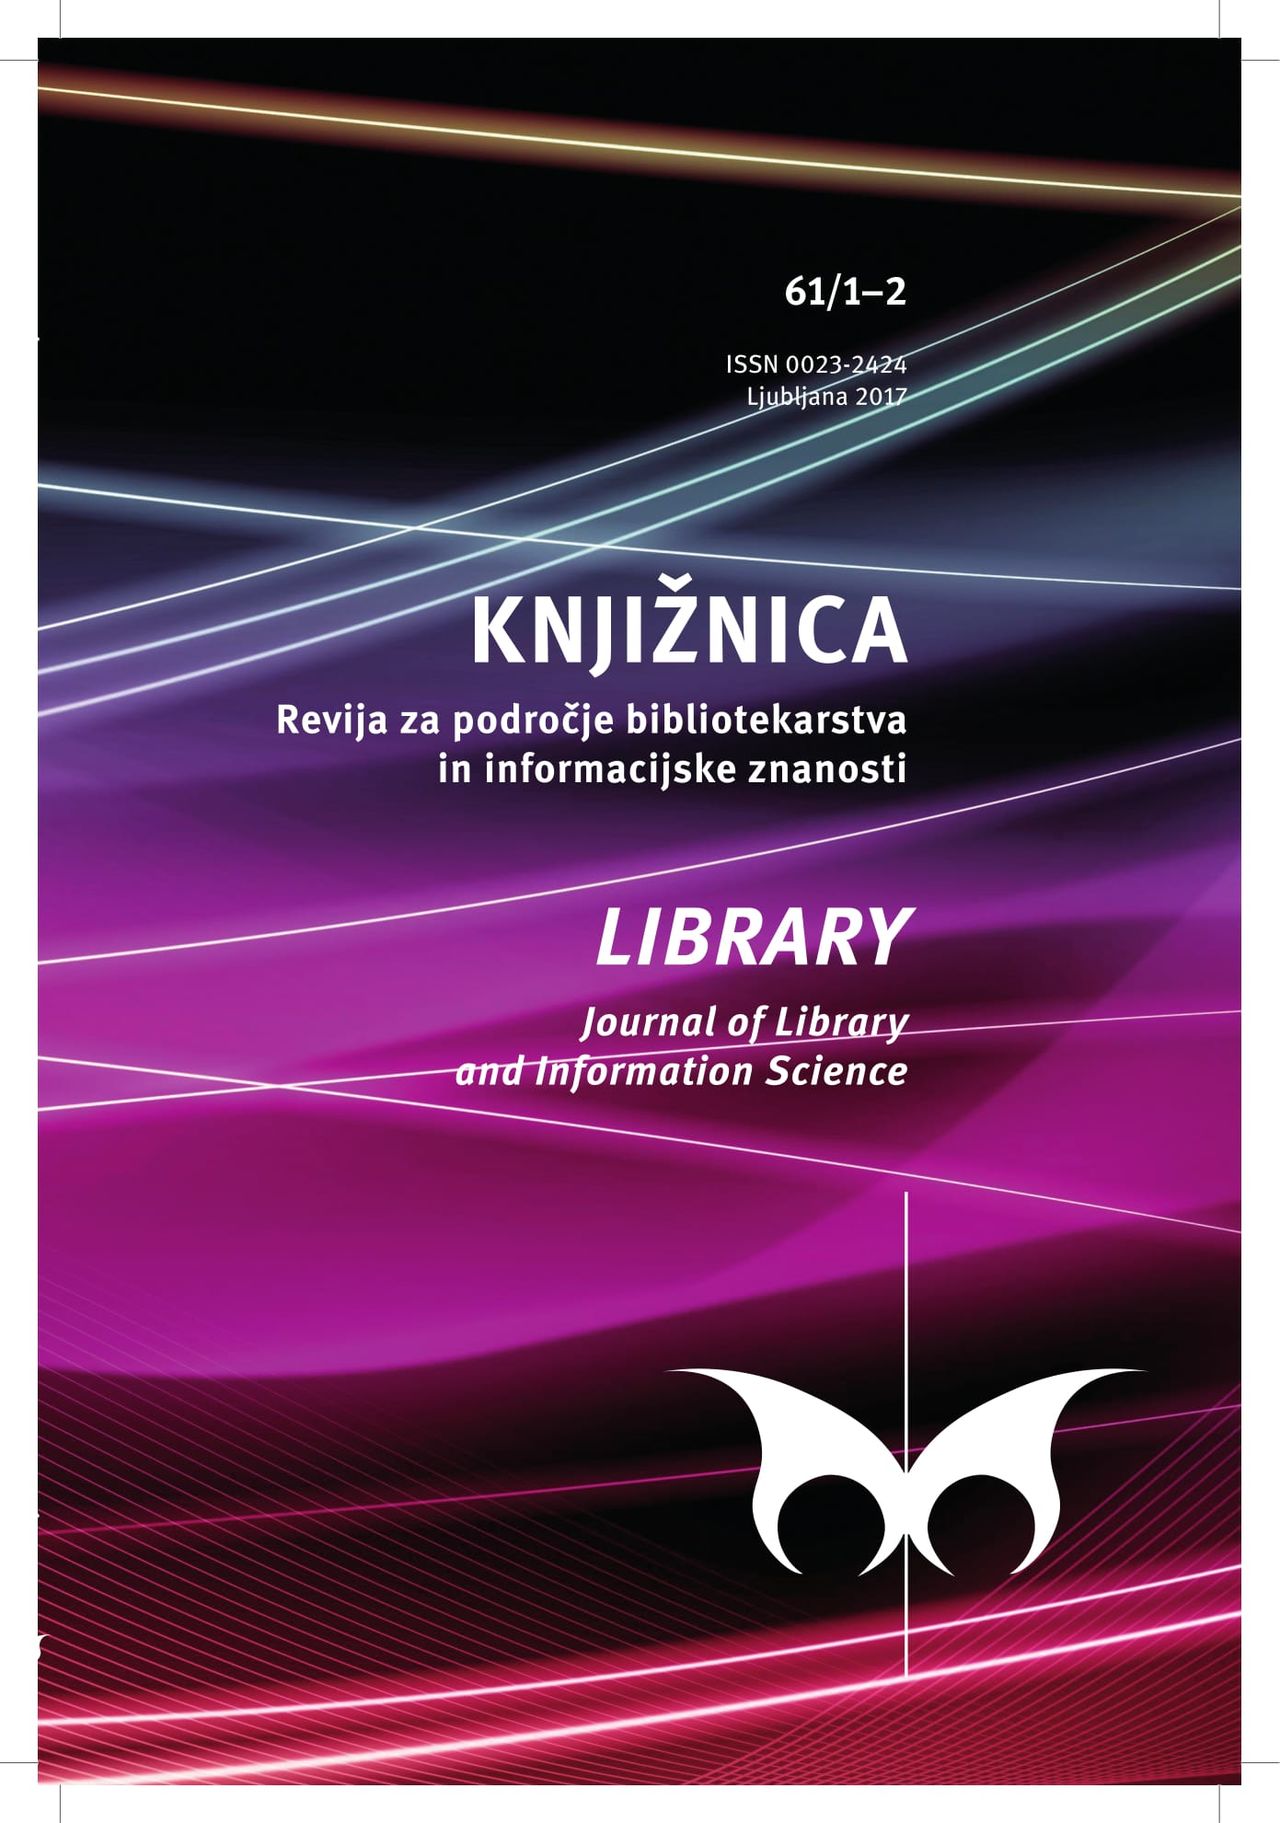 Library, Journal of Library and Information Science 2017.jpg